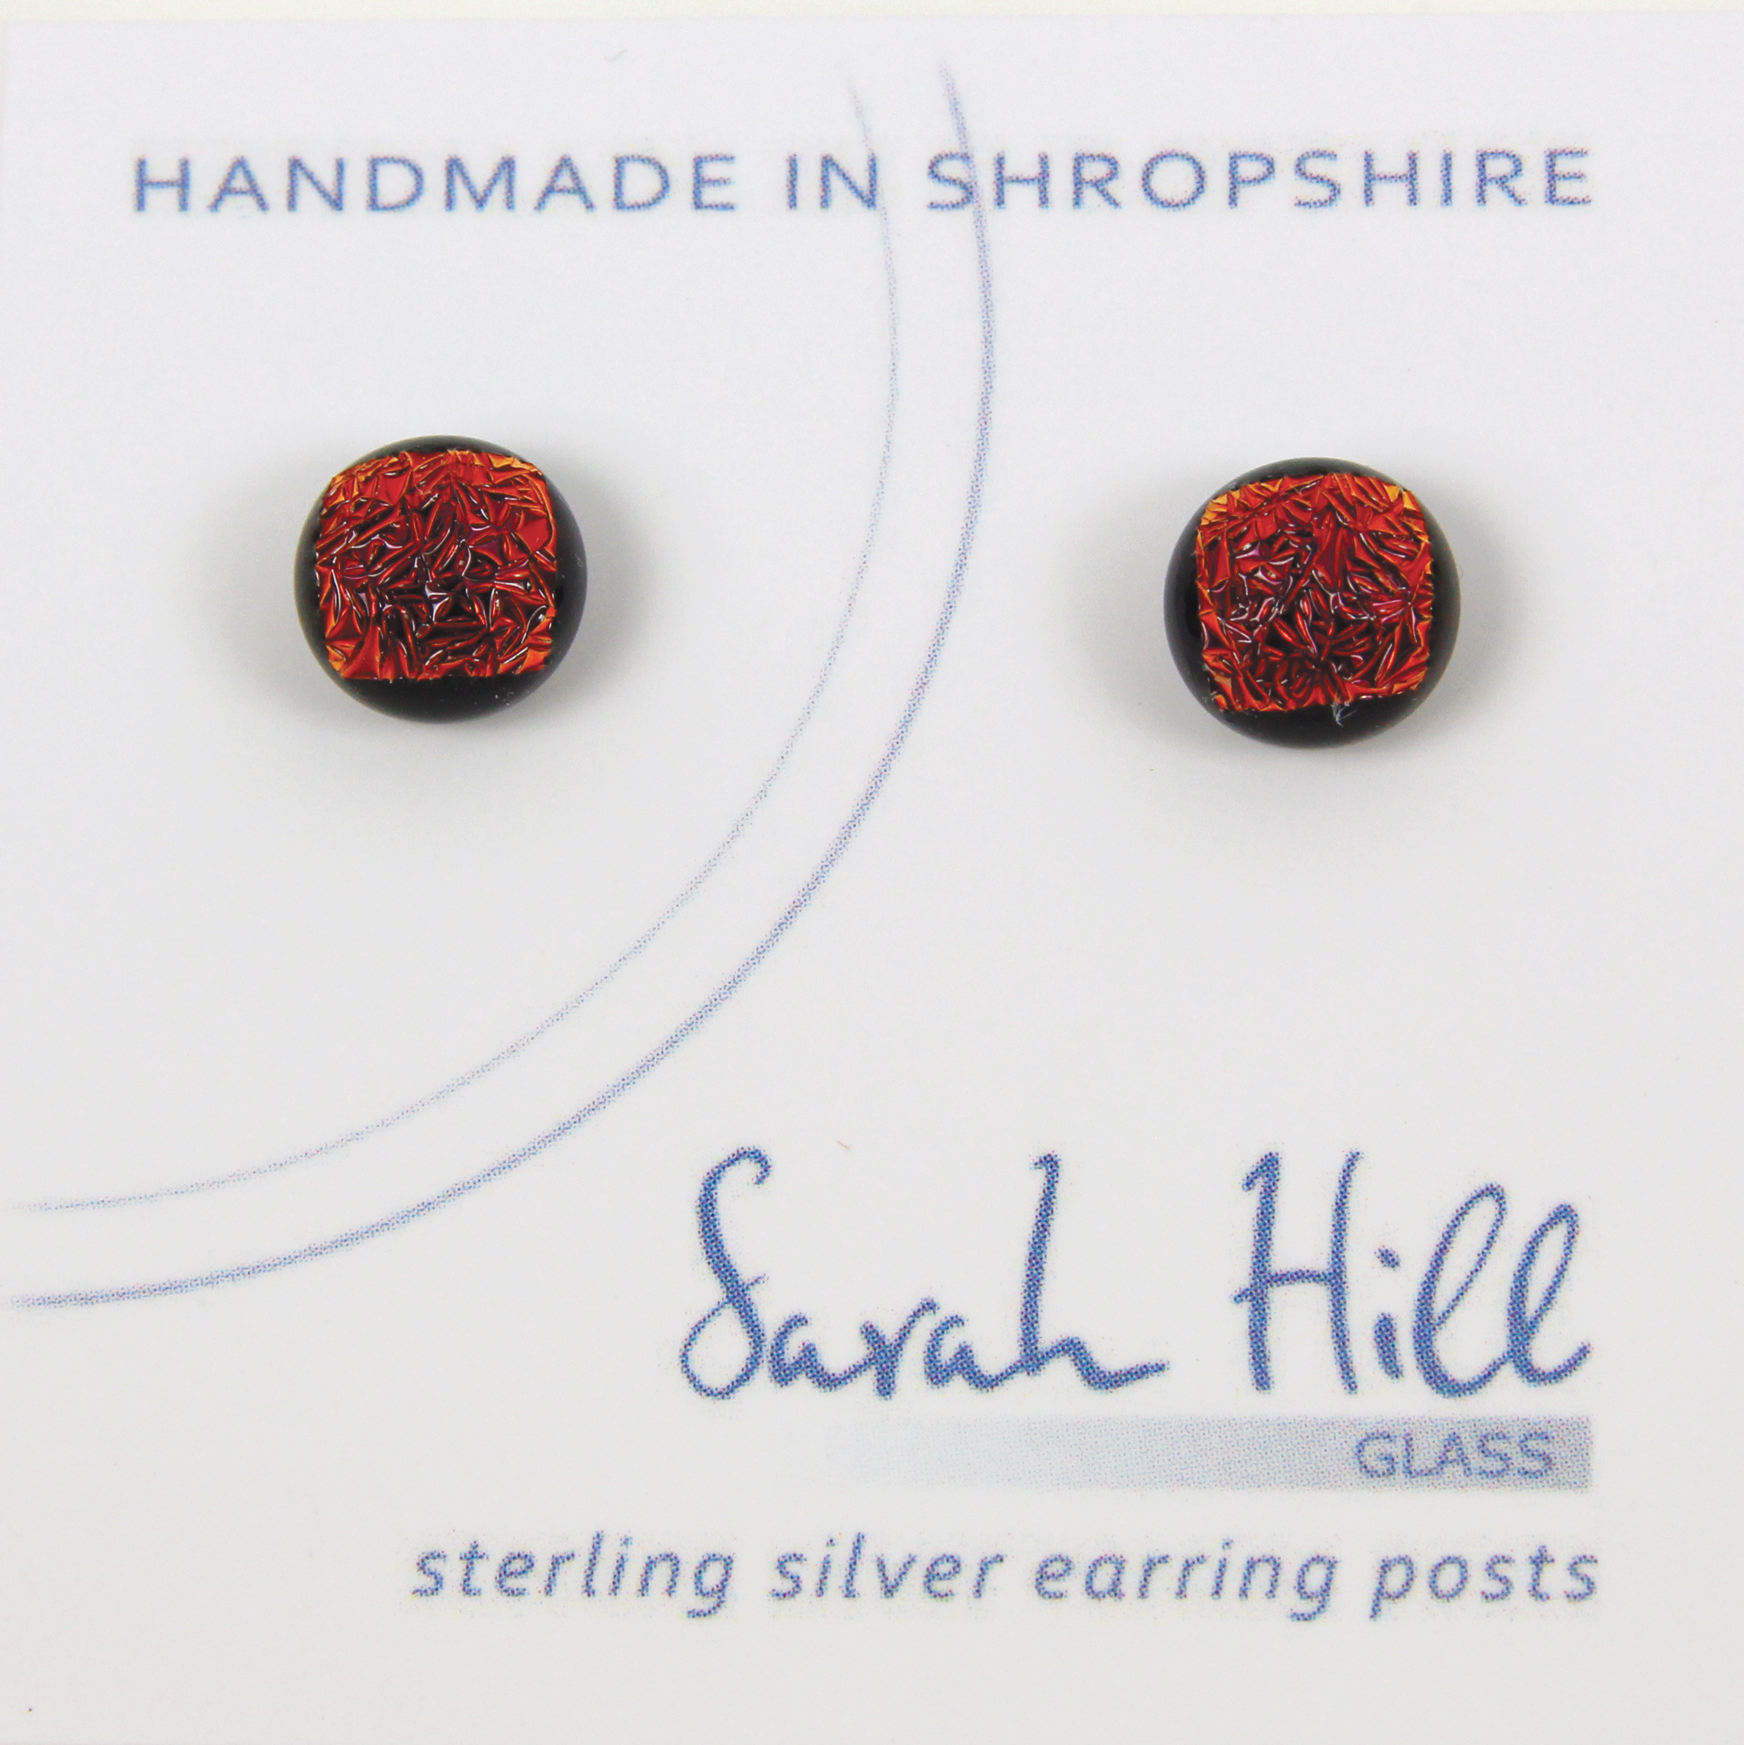 Dichroic glass jewellery uk, handmade stud earrings with copper red dichroic glass, round, sterling glass 7mm, silver posts.